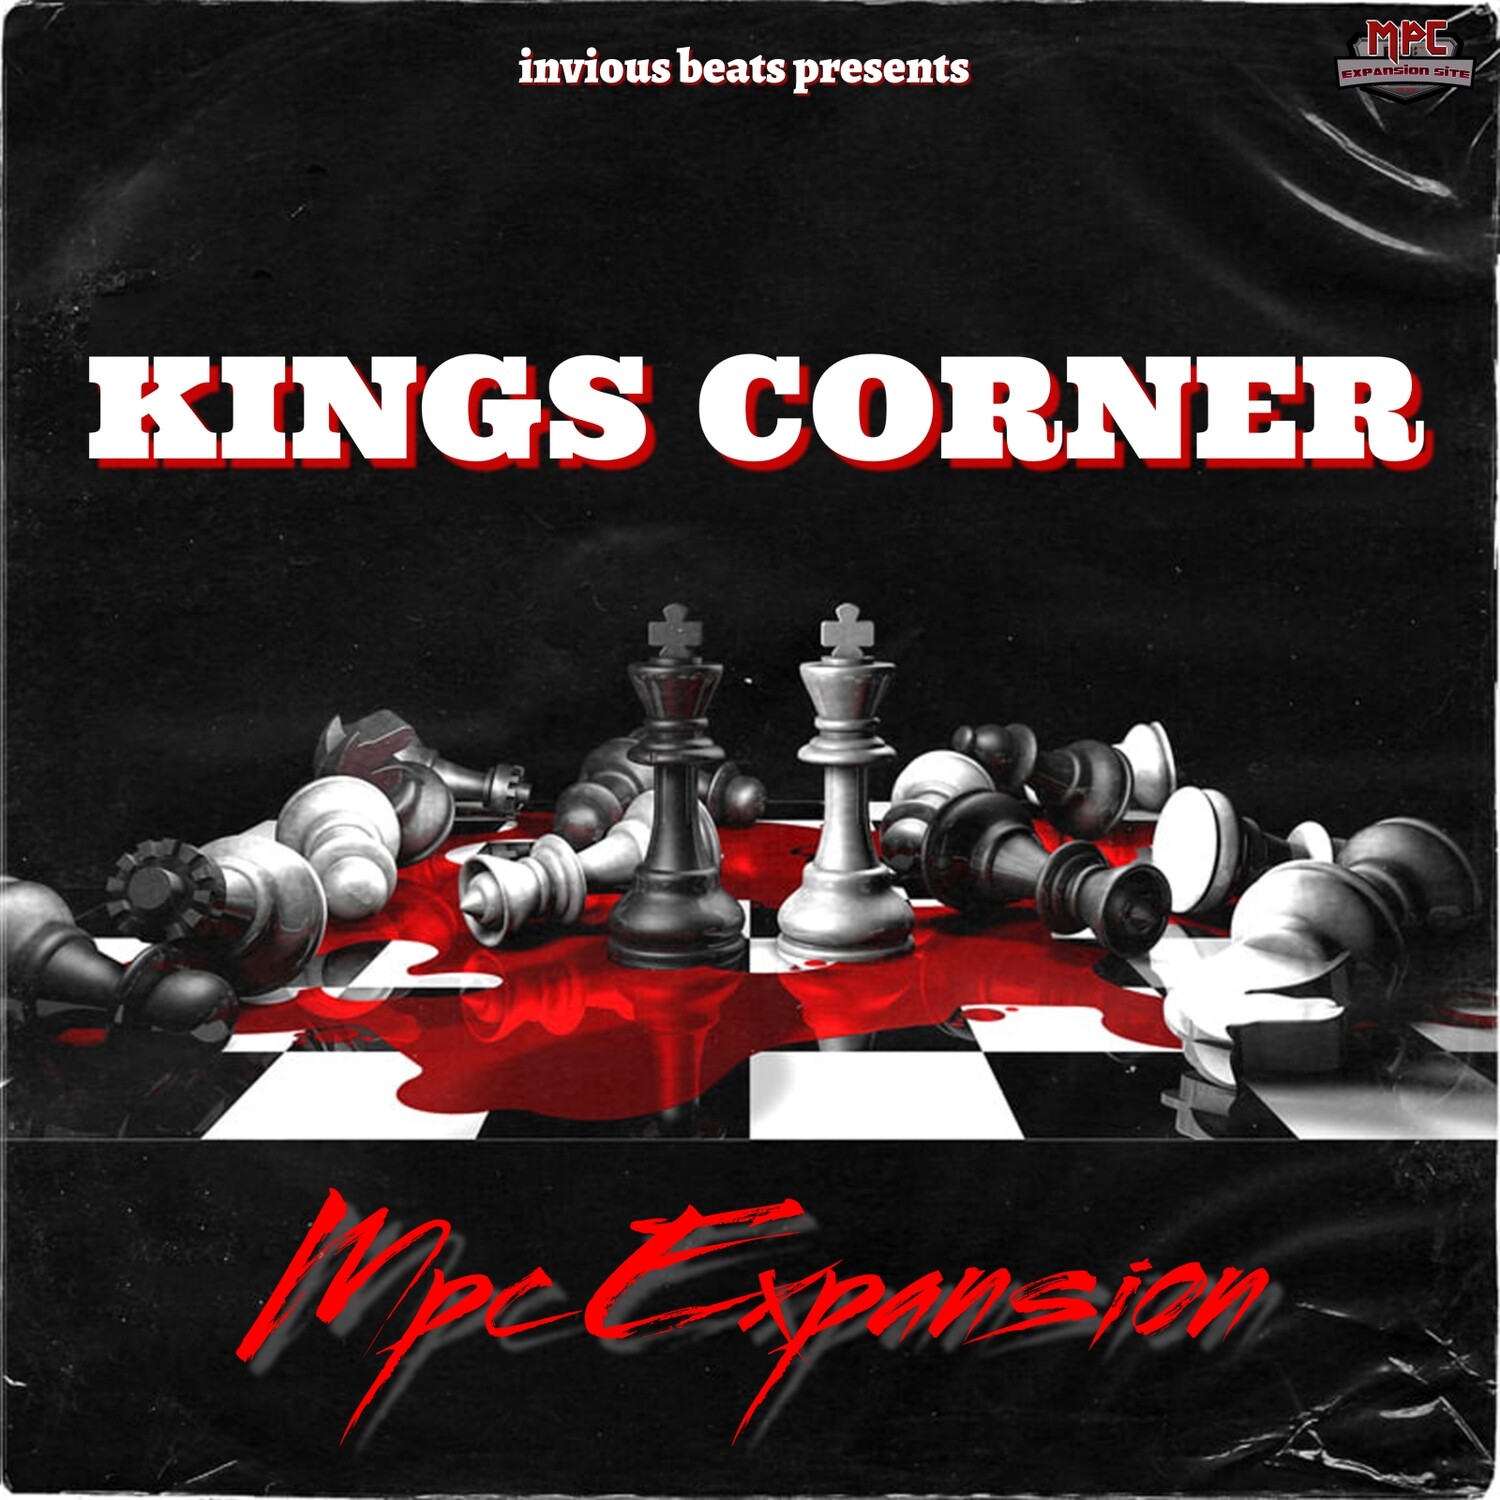 MPC EXPANSION 'KINGS CORNER' by INVIOUS